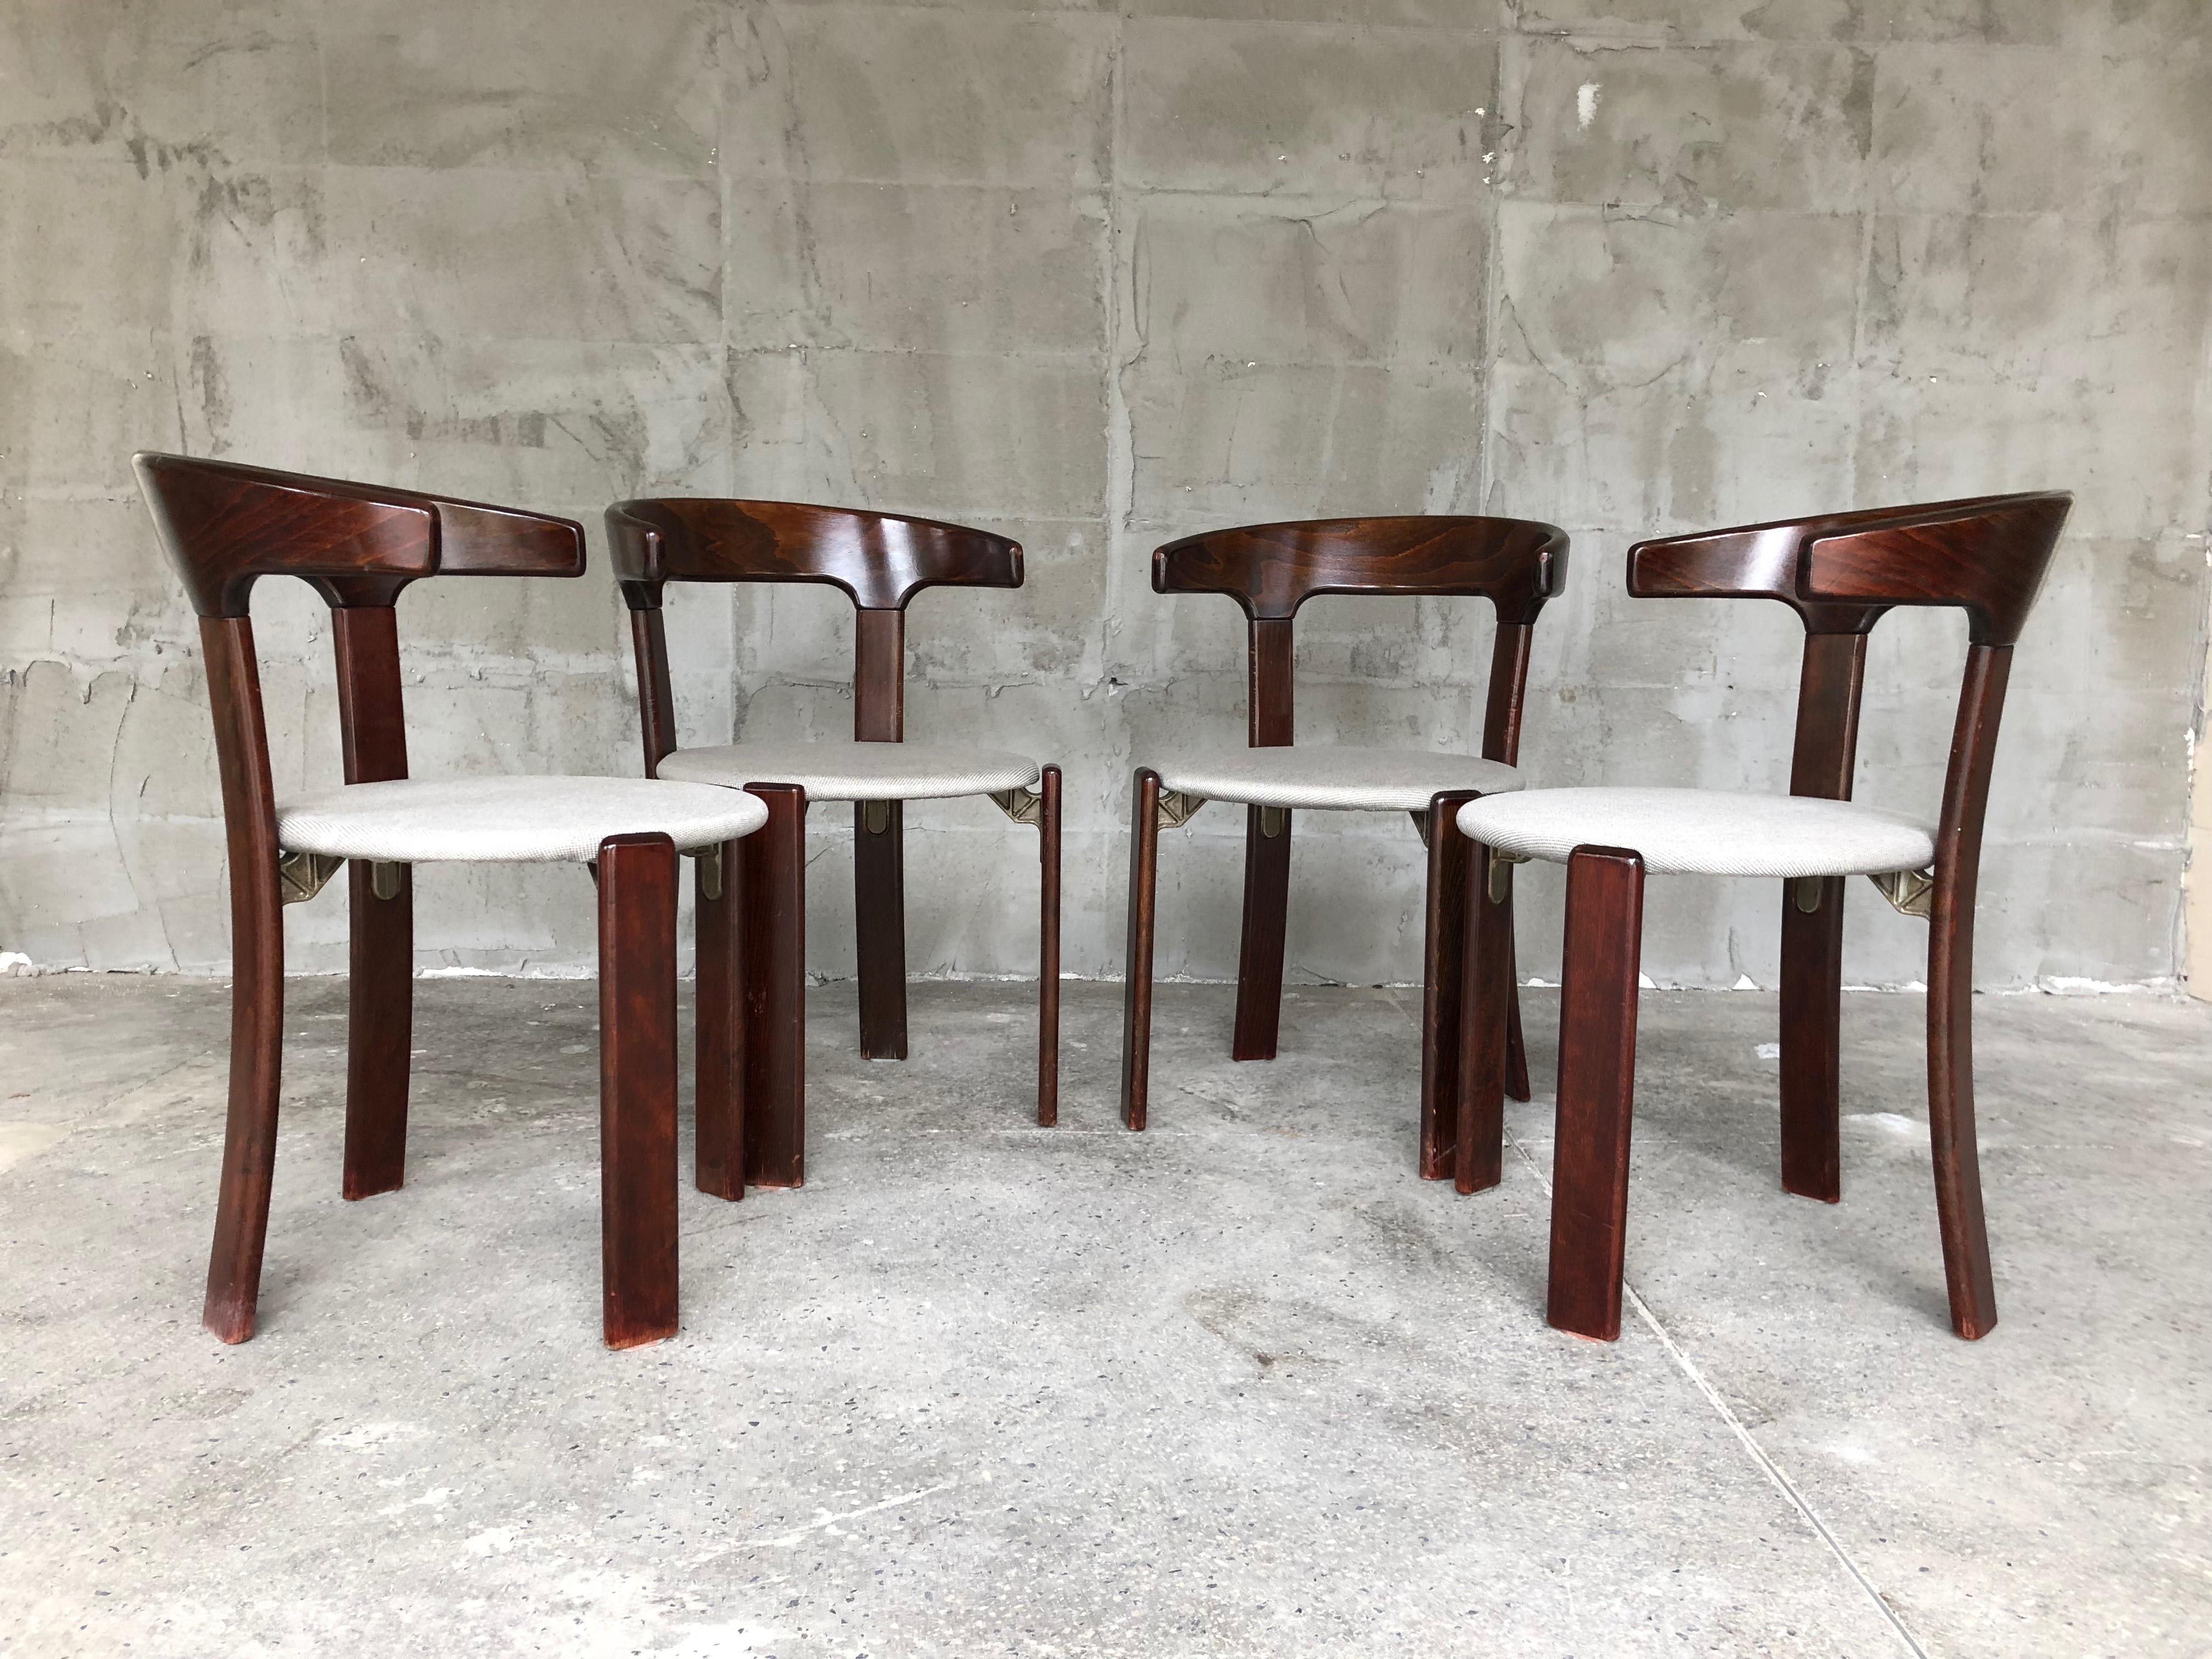 Limited edition of chairs of Bruno Rey produced with special armrest. The design keeps its typical line but presents one version more sophisticated and elegant.